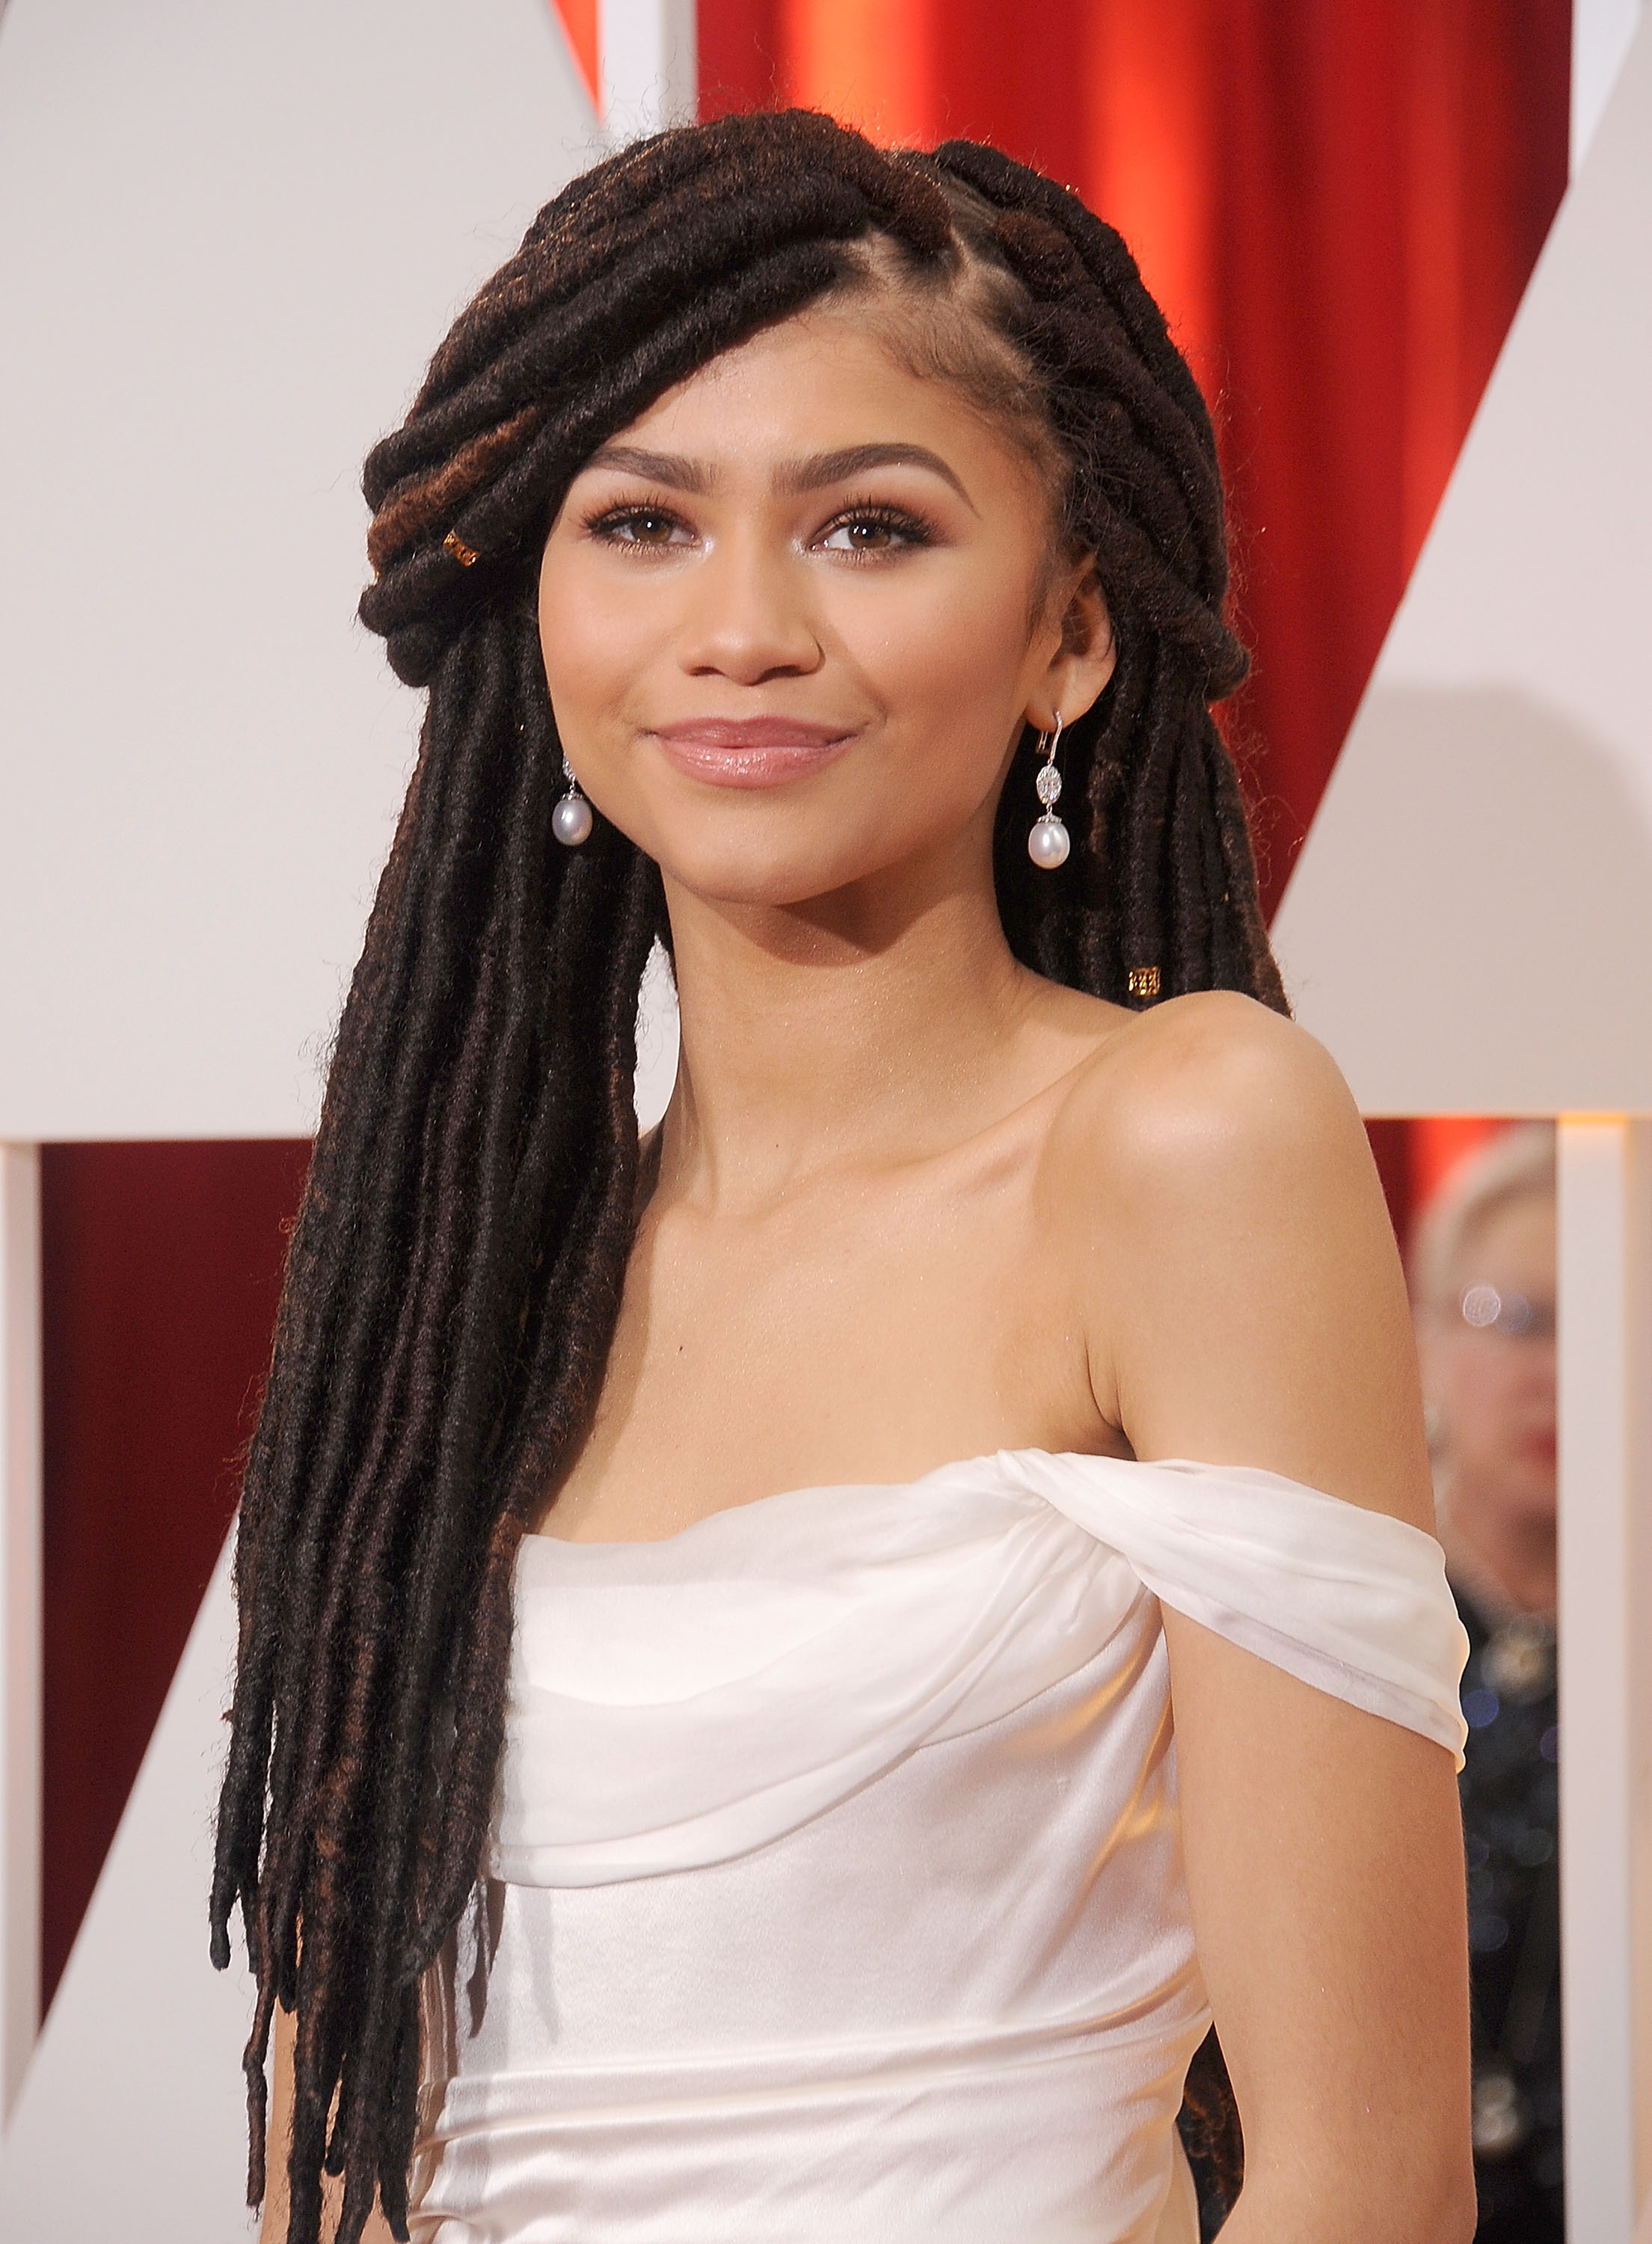 Actress/singer Zendaya arrives at the 87th Annual Academy Awards on Feb. 22, 2015 in Hollywood, California. (Gregg DeGuire—WireImage)